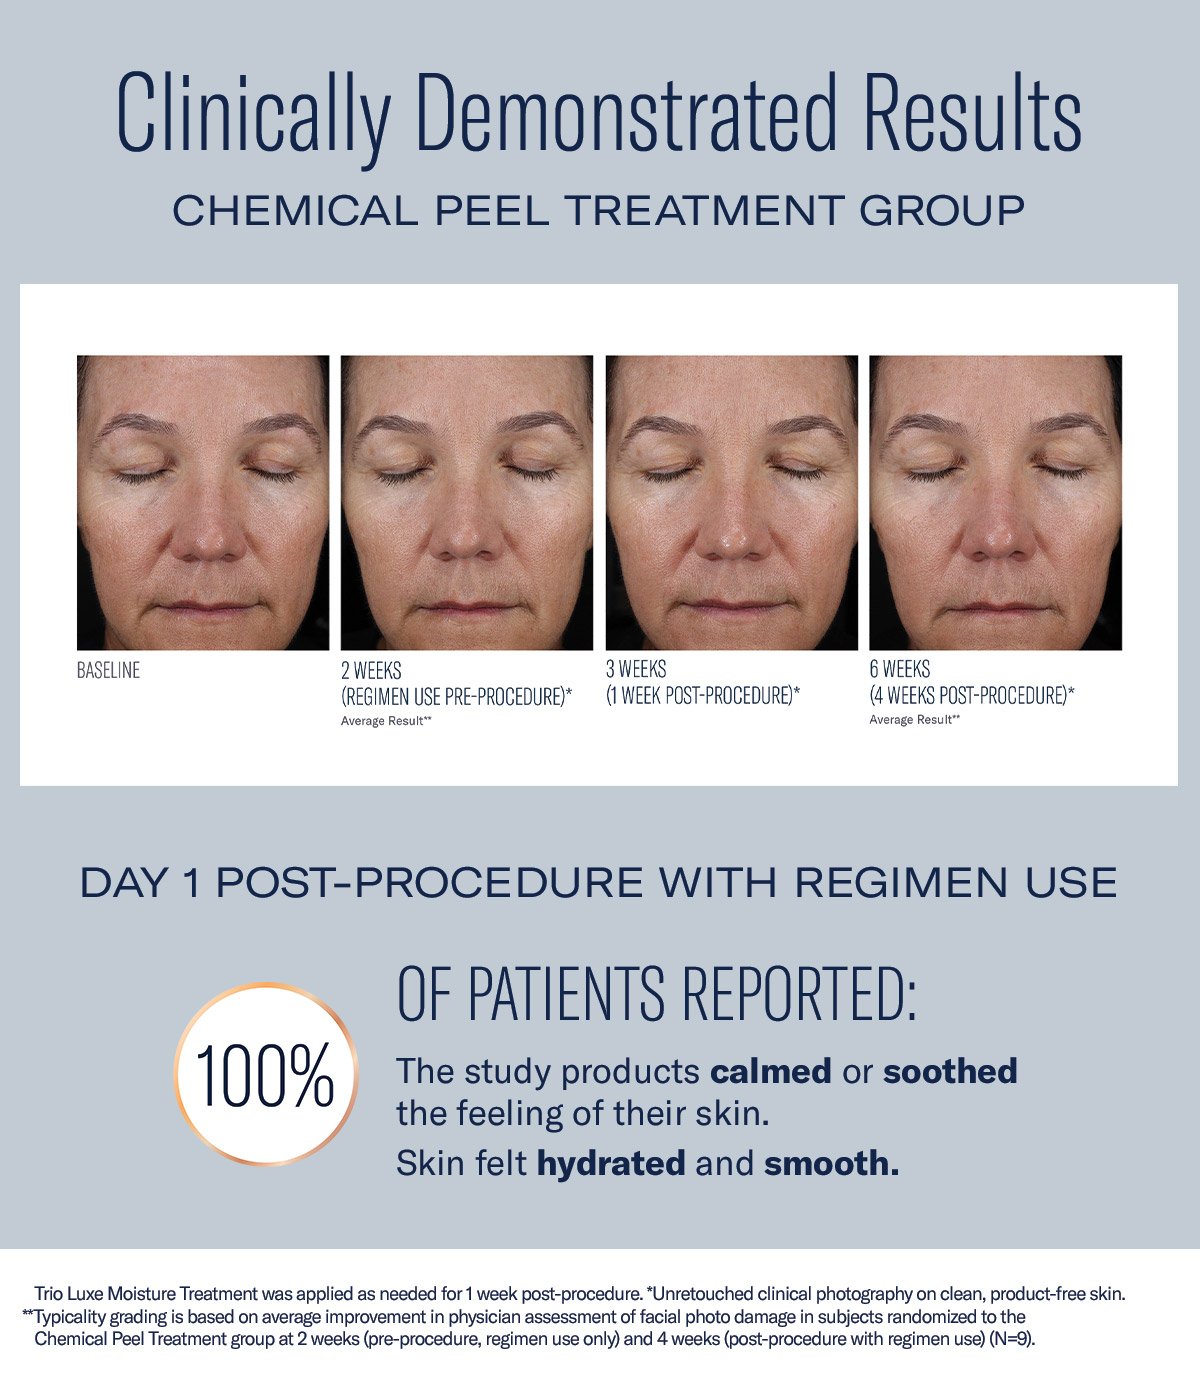 Clinically Demonstrated Results: CHEMICAL PEEL TREATMENT GROUP